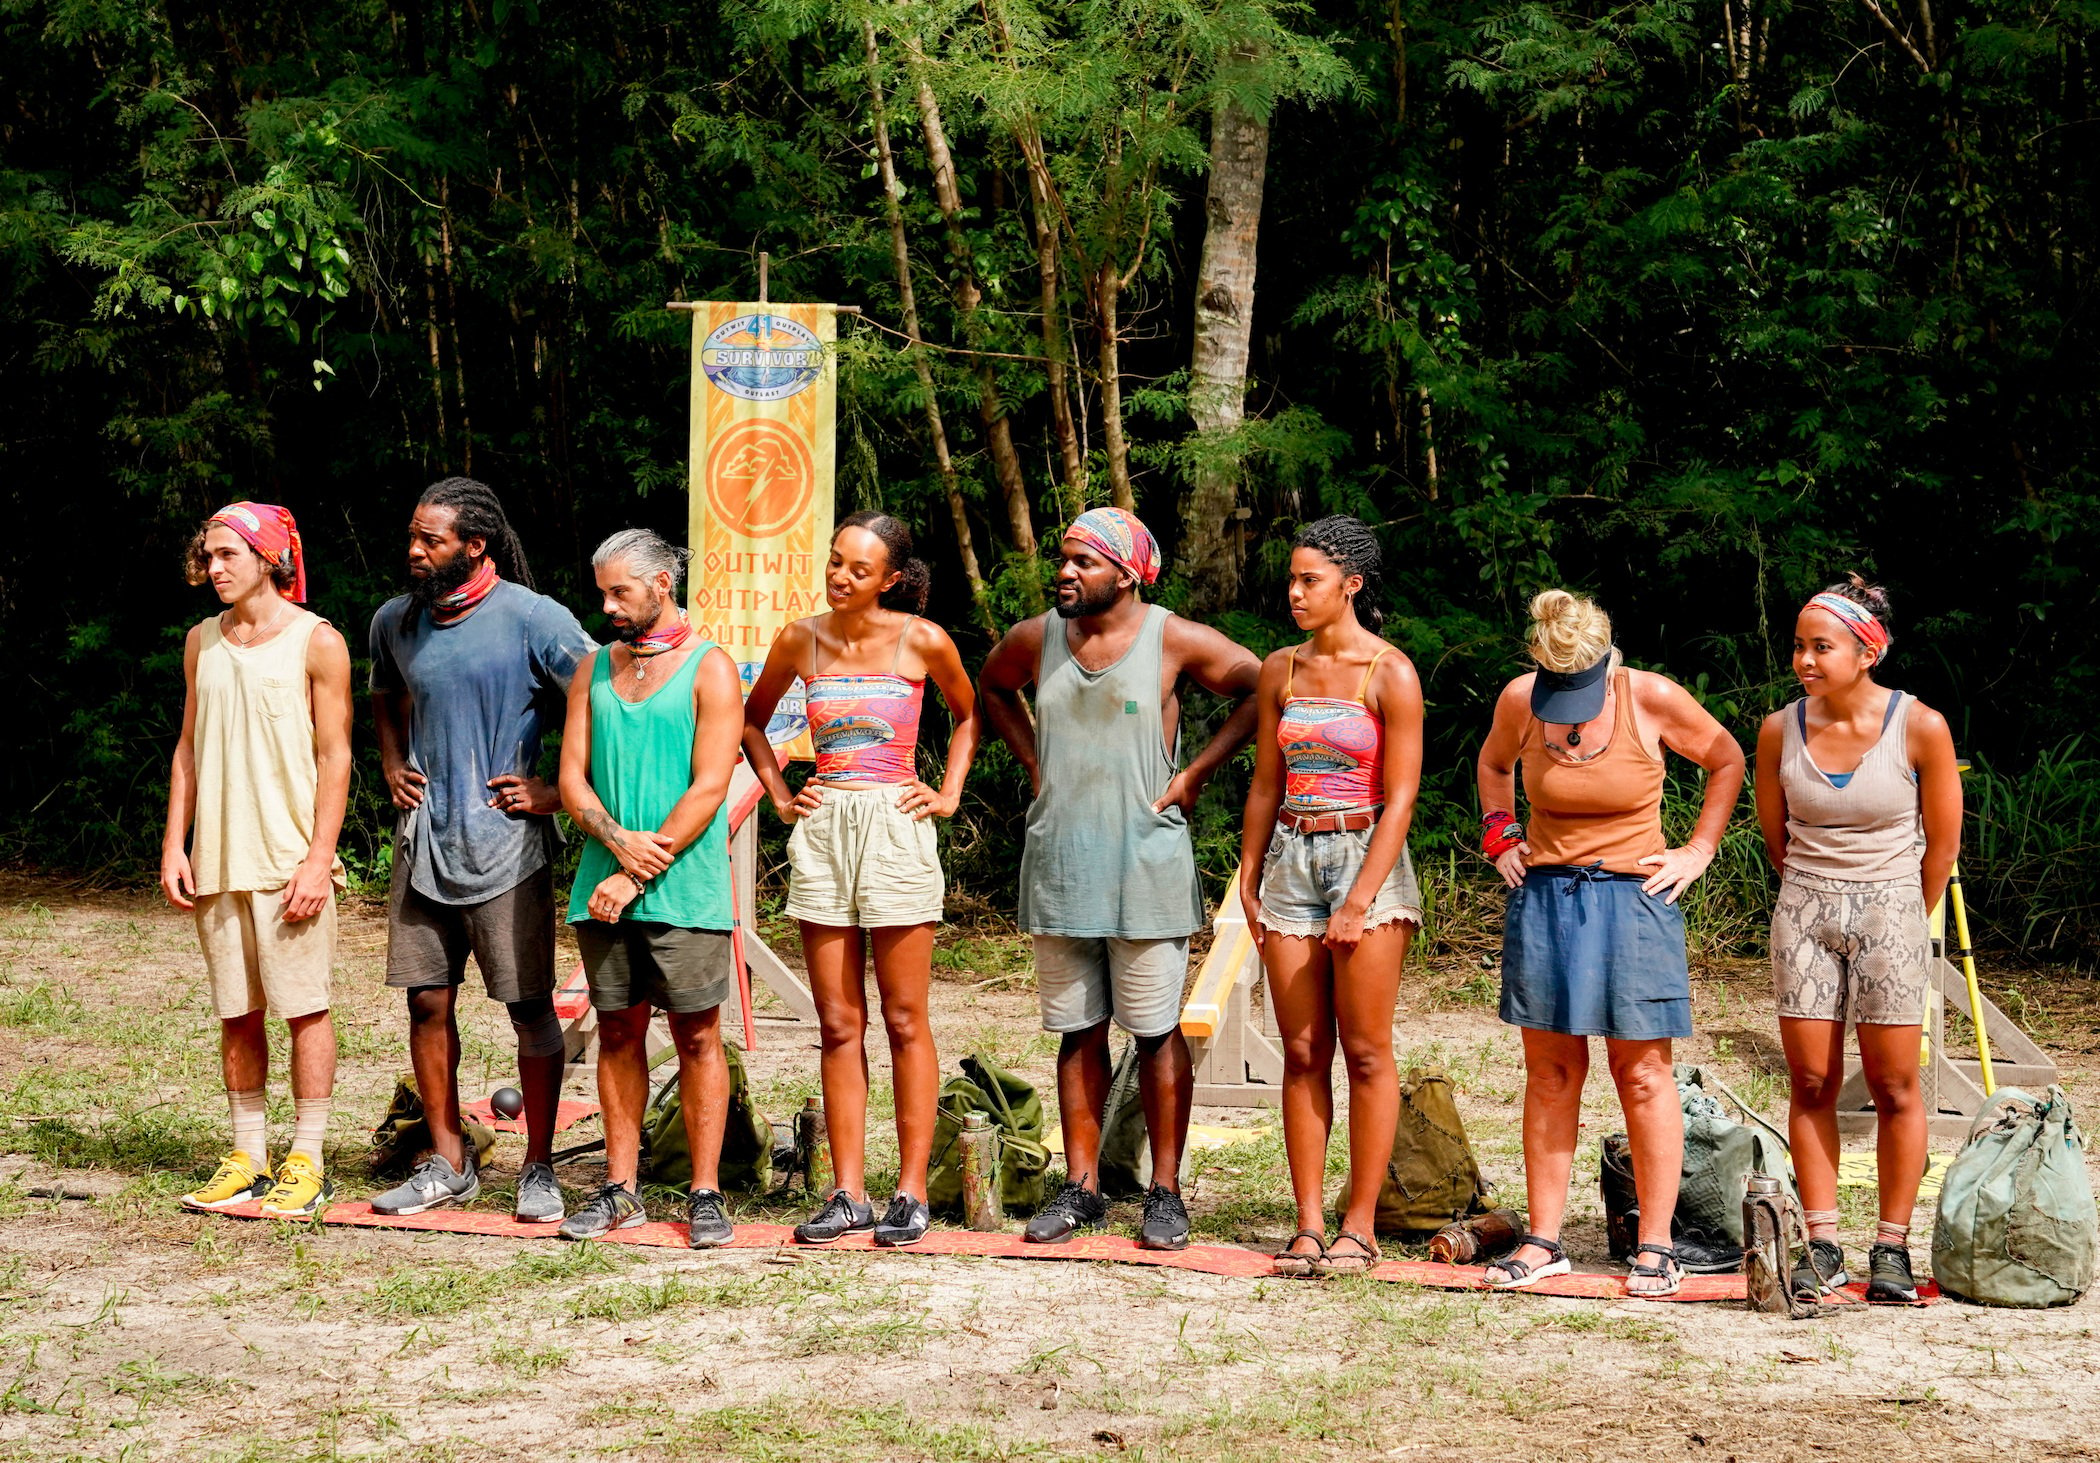 The 'Survivor' Season 41 cast  standing in a line outside ready to hear about a challenge. 'Survivor' Season 41 spoilers note Shan gets blindsided and sent home.